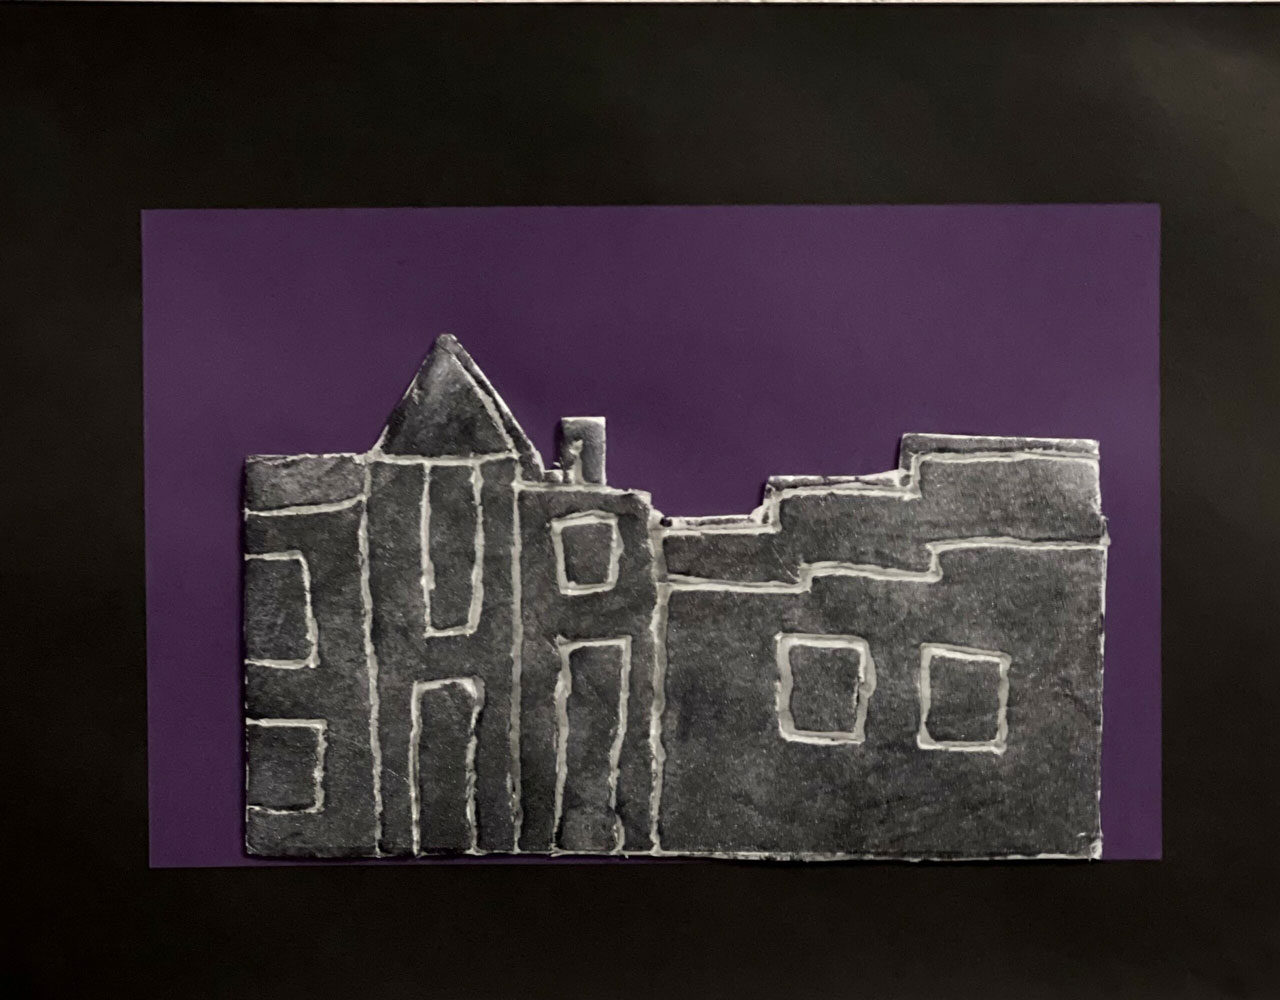 A cityscape painting at night artwork on a purple background.